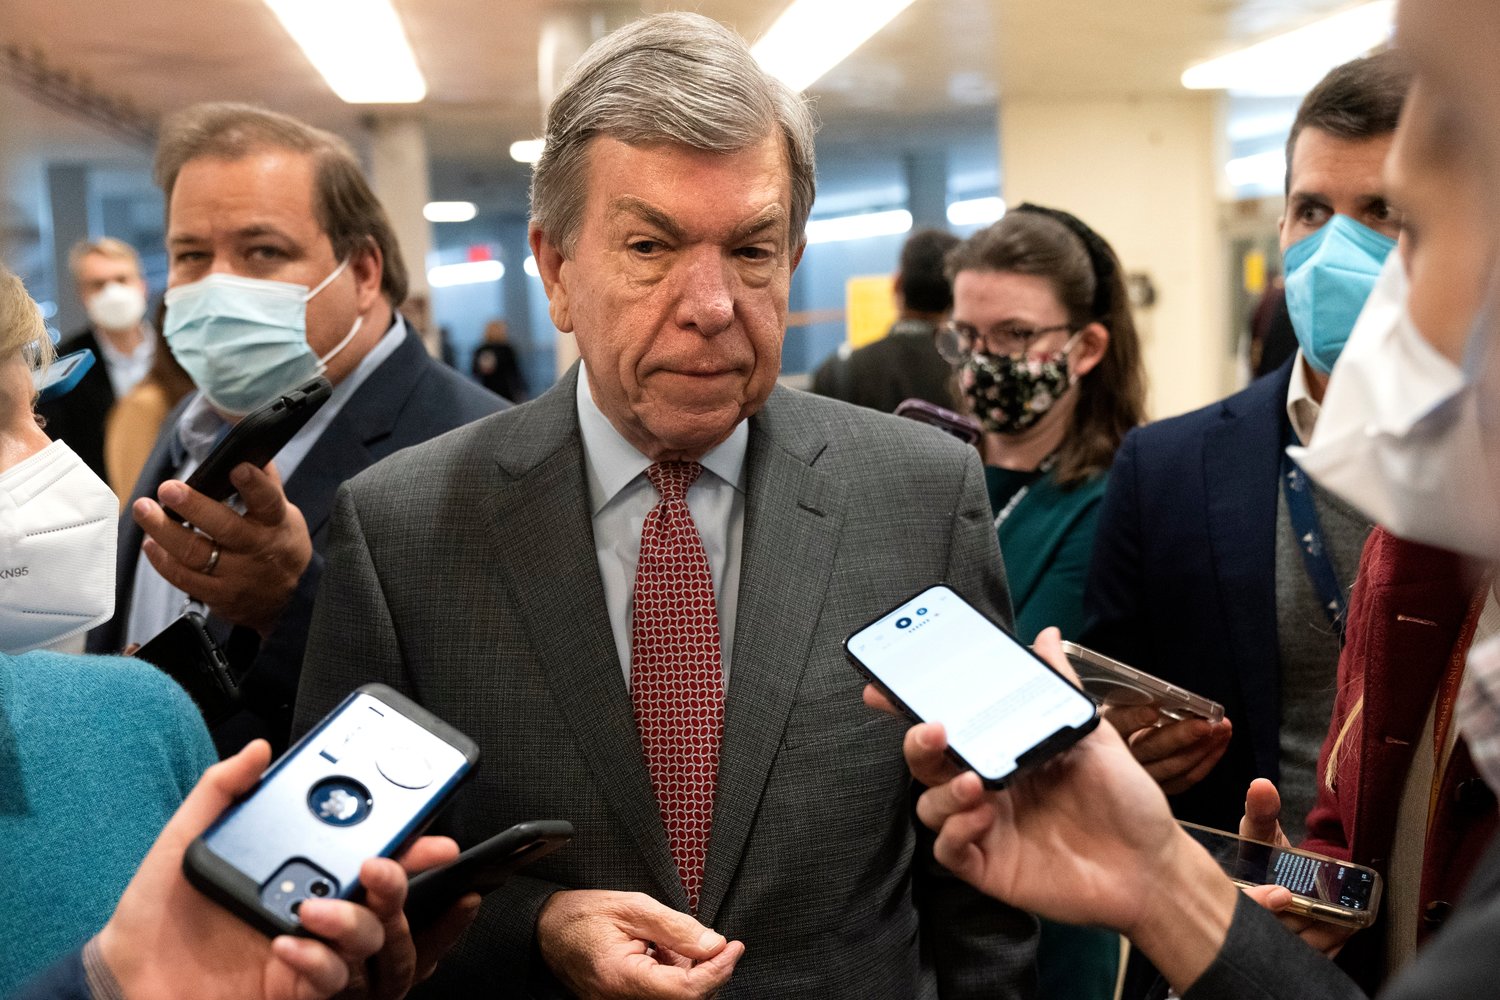 Sen. Roy Blunt, R-Mo., speaks with reporters, Thursday, Dec. 2, 2021, on Capitol Hill in Washington. (AP Photo/Jacquelyn Martin)